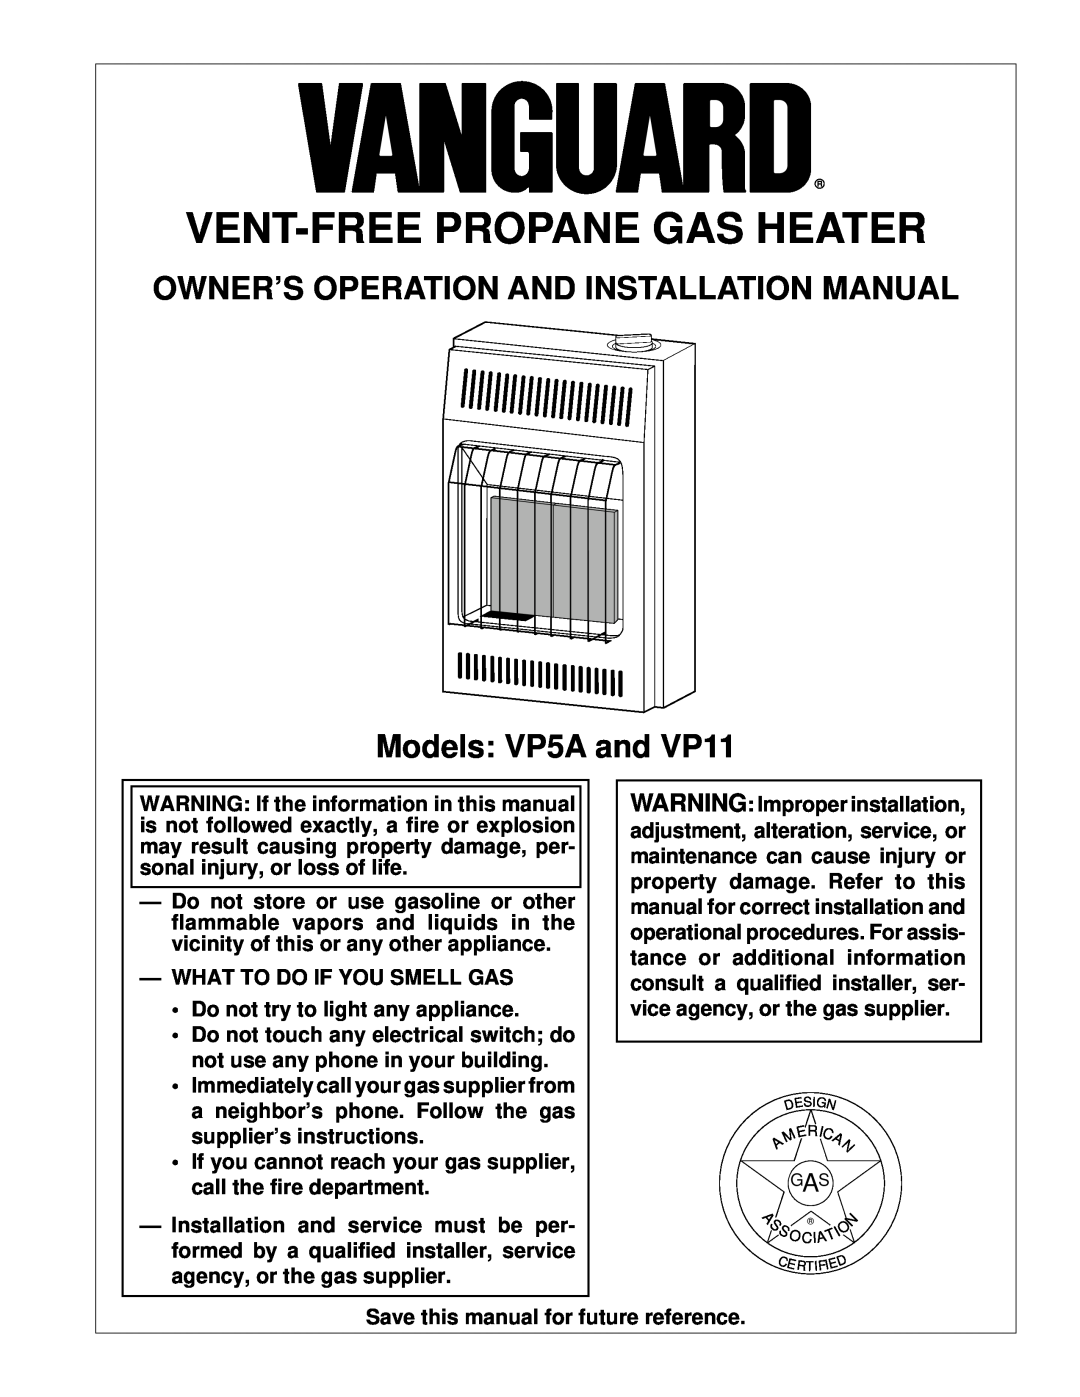 Desa installation manual Owner’S Operation And Installation Manual, Models VP5A and VP11, Vent-Freepropane Gas Heater 